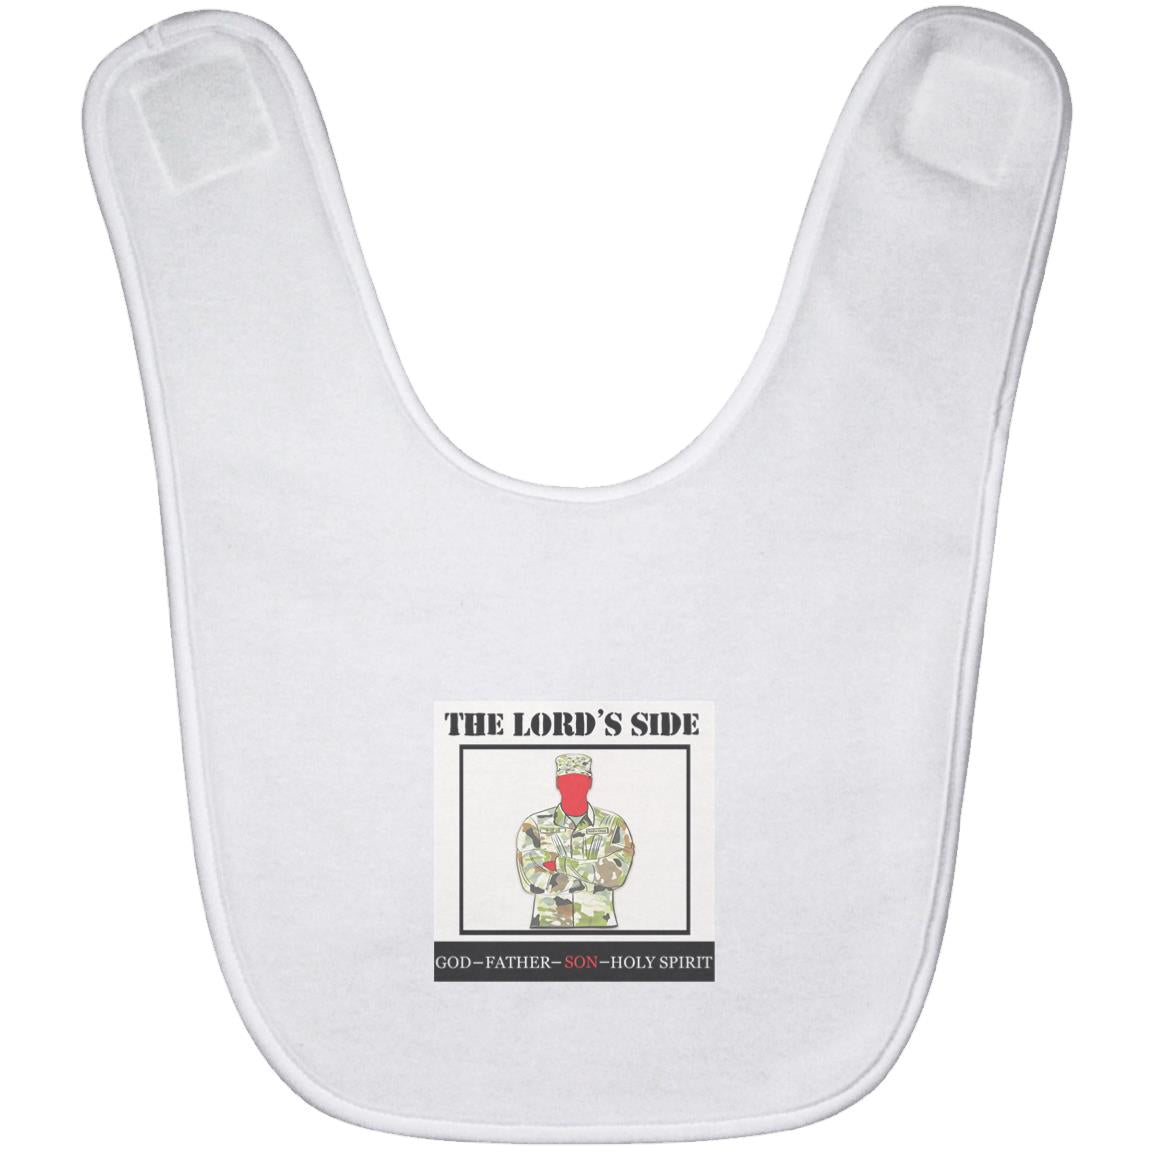 The Lord's Side Baby Bib